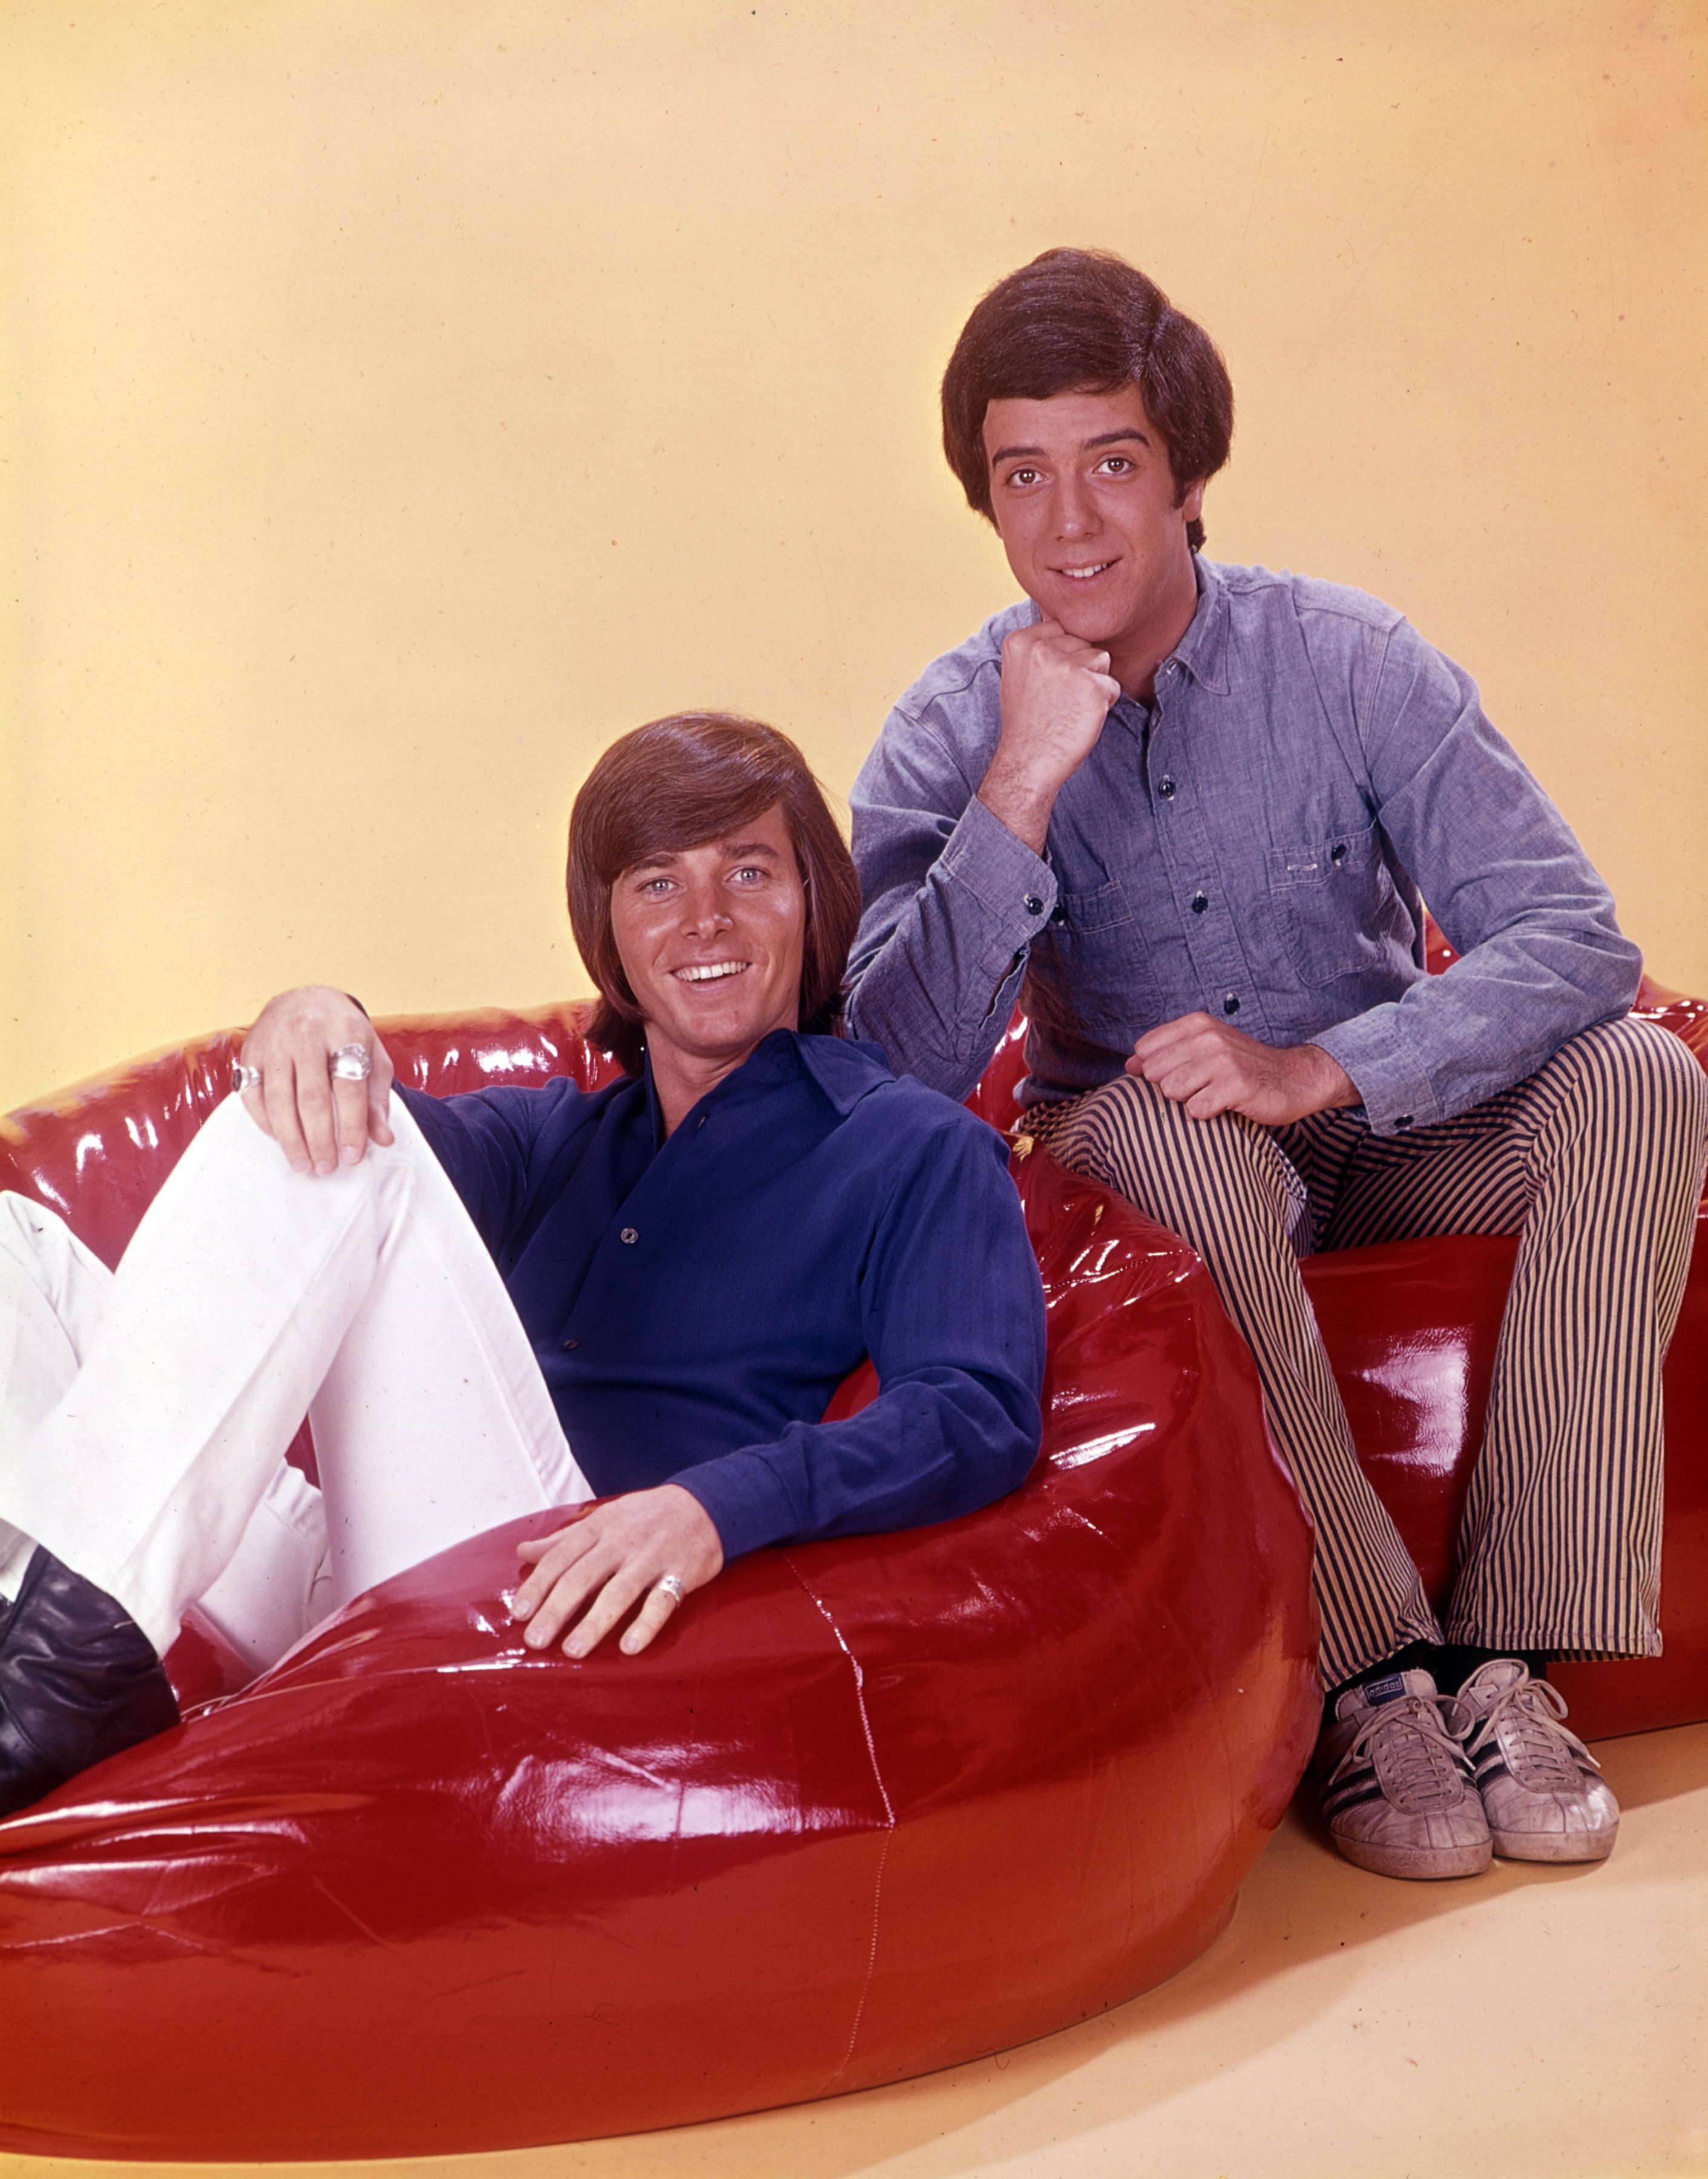 Bobby Sherman and Wes Stern in "Getting Together," on April 27, 1971 | Source: Getty Images